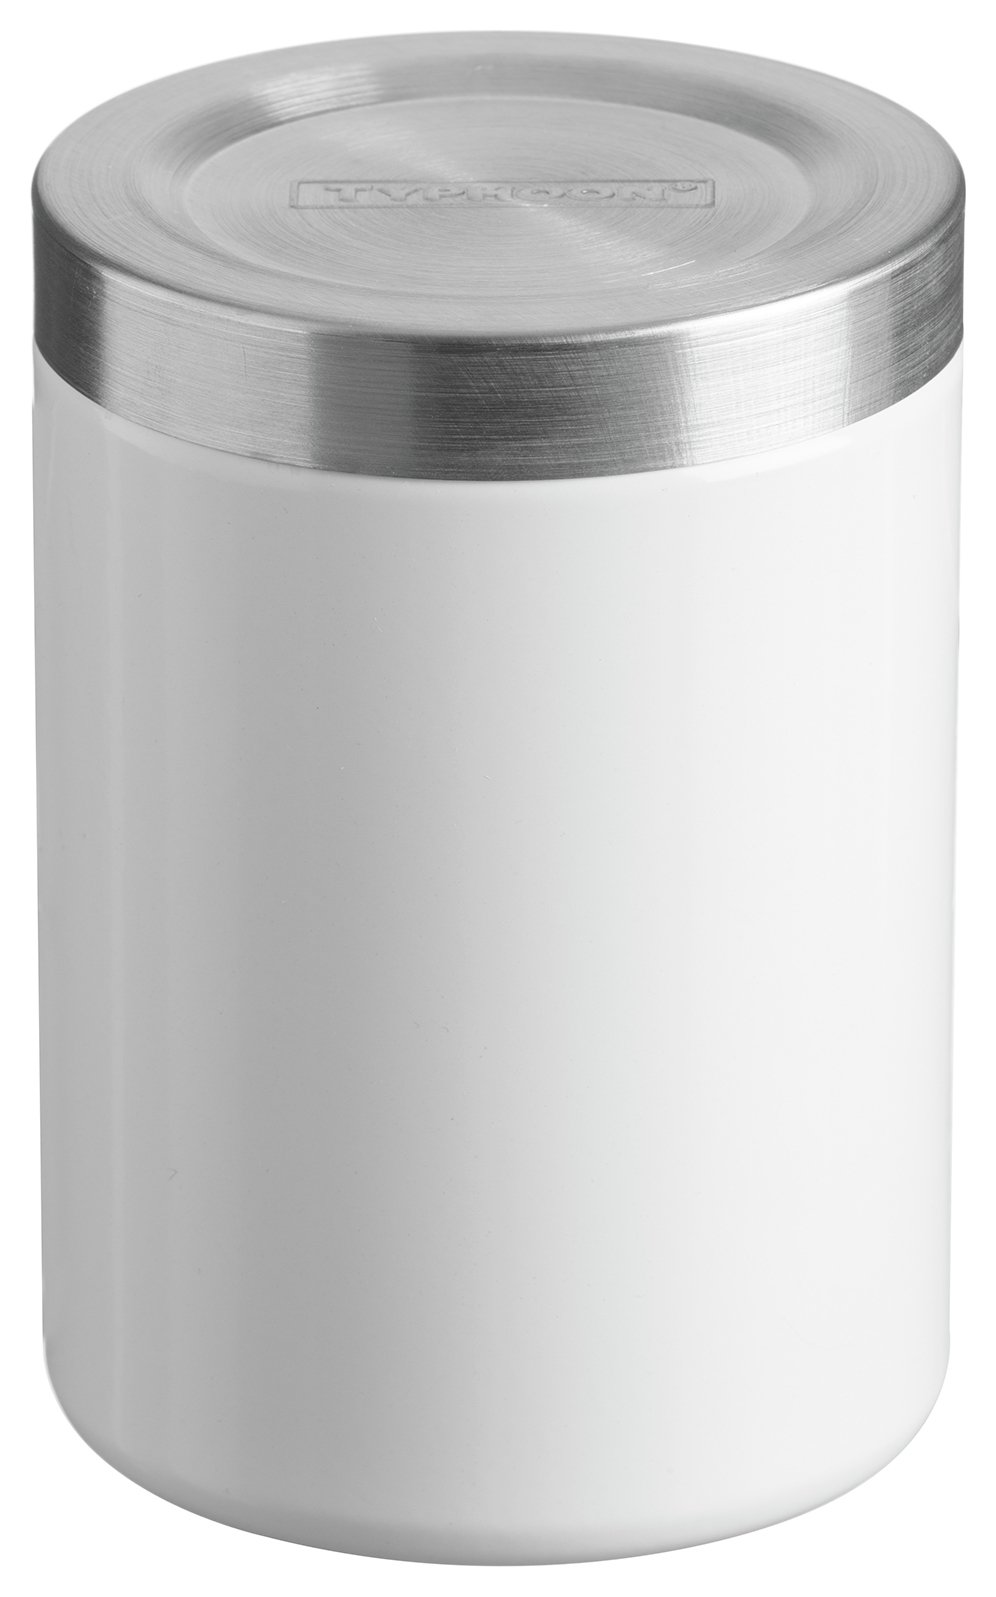 Typhoon Hudson 15cm Stacking Storage Canister - White